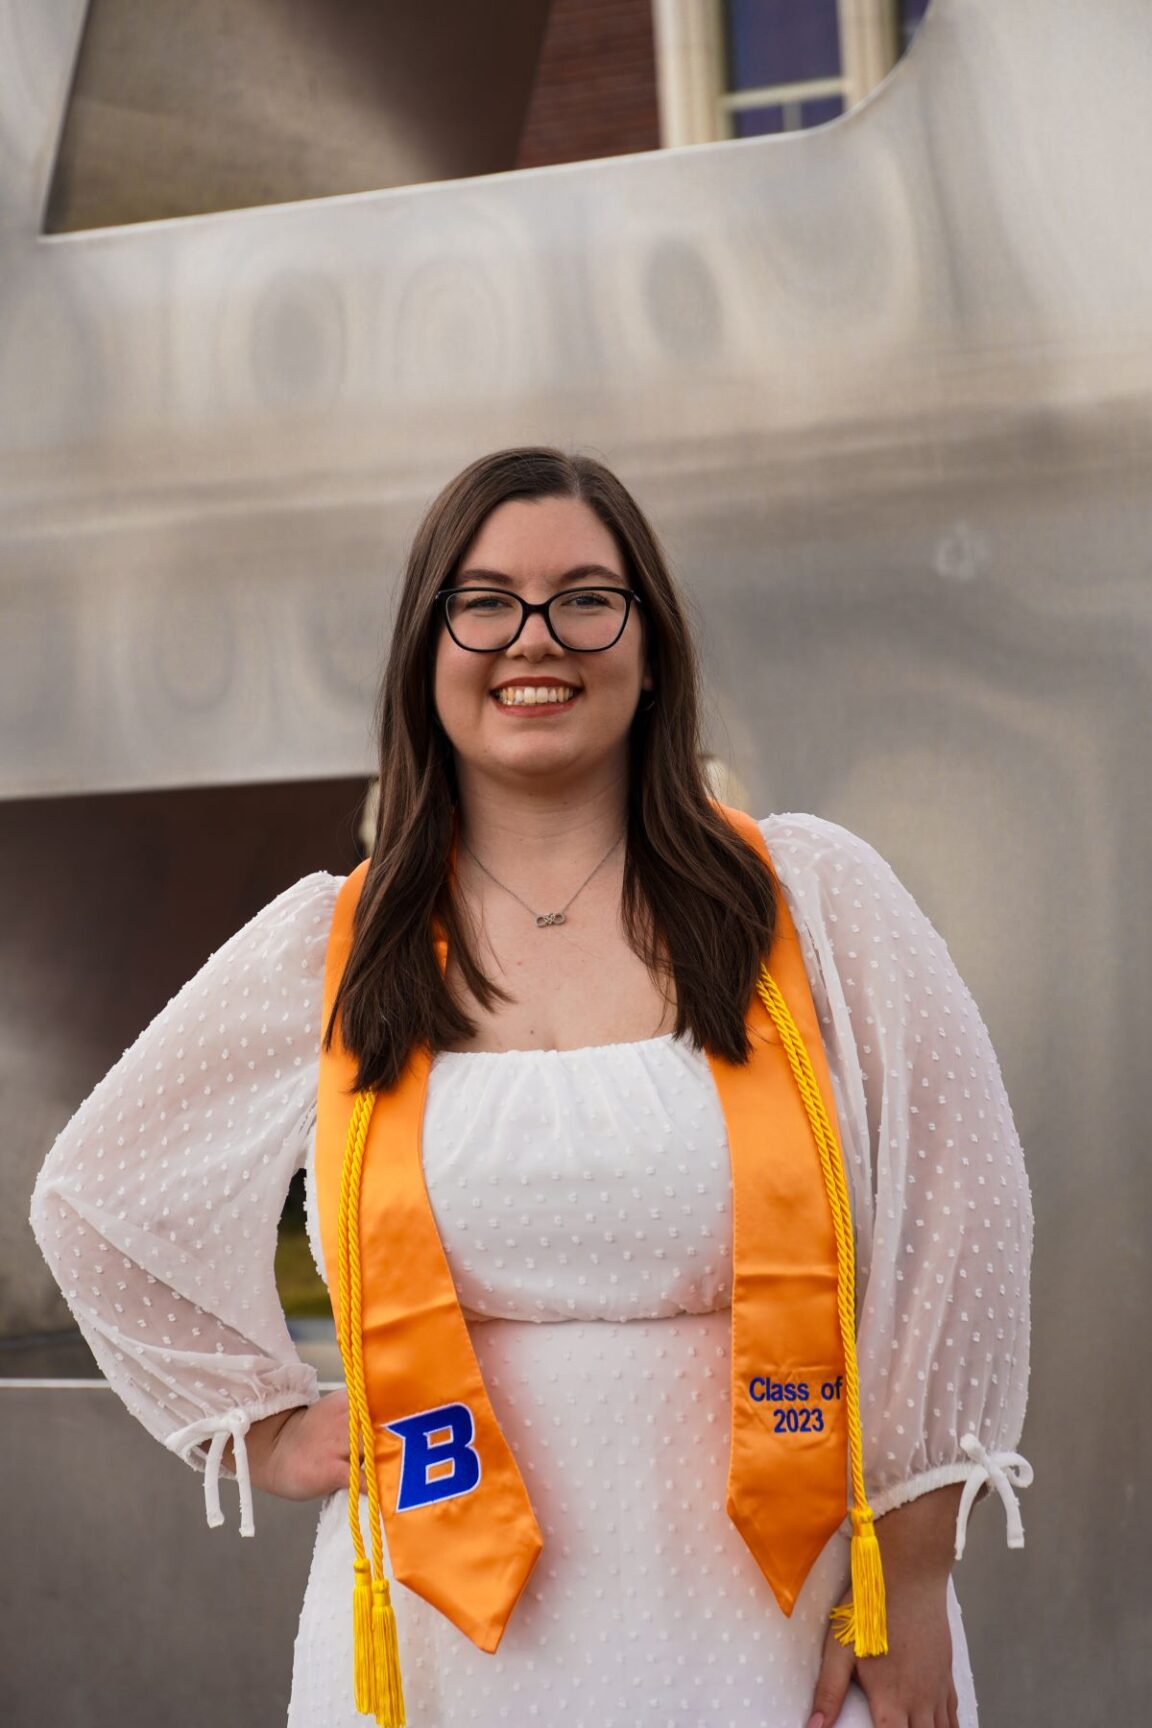 Ashley Williams wearing Boise State graduation stole and cords